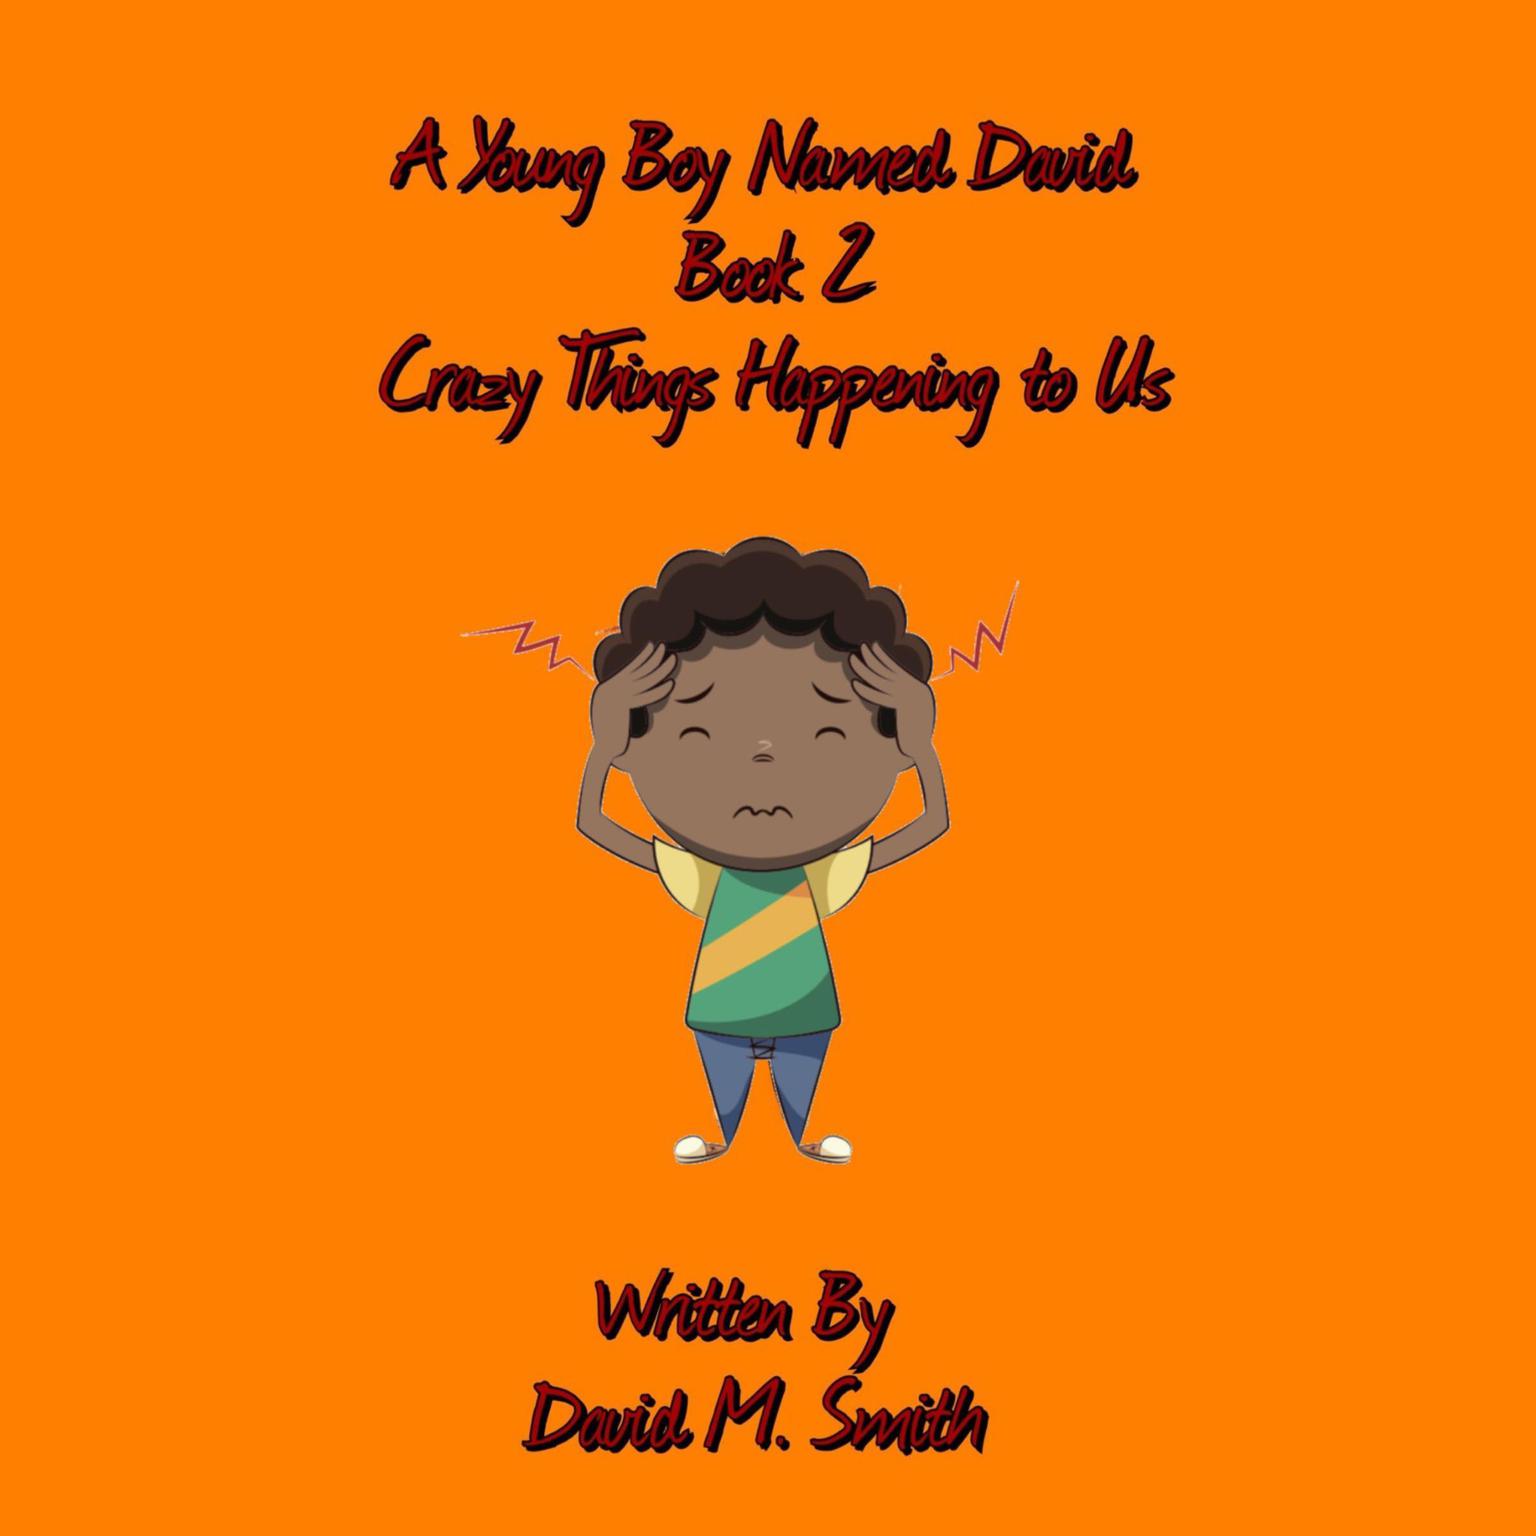 A Young Boy Named David Book 2: Crazy Things Happening to Us Audiobook, by David M. Smith